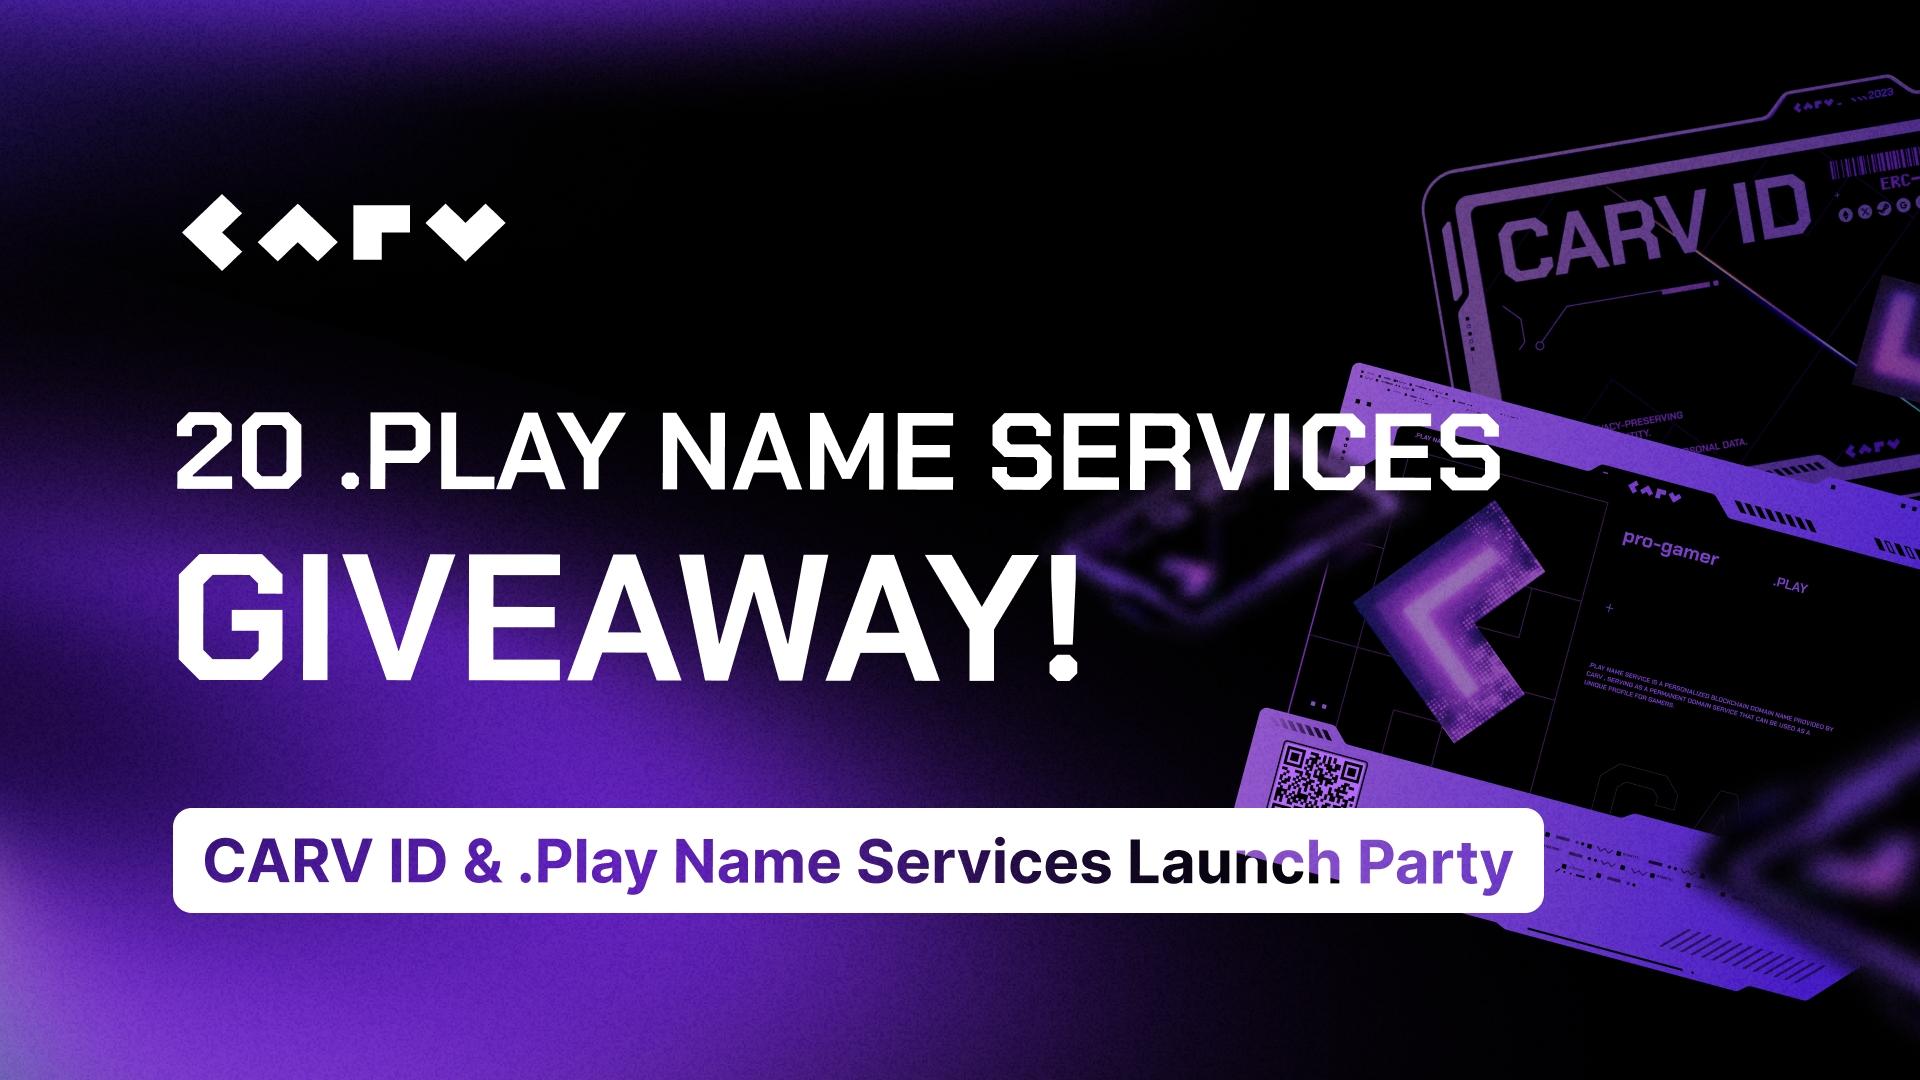 Giveaway 20 .Play Name Services! CARV ID & .Play Name Services Launch Party